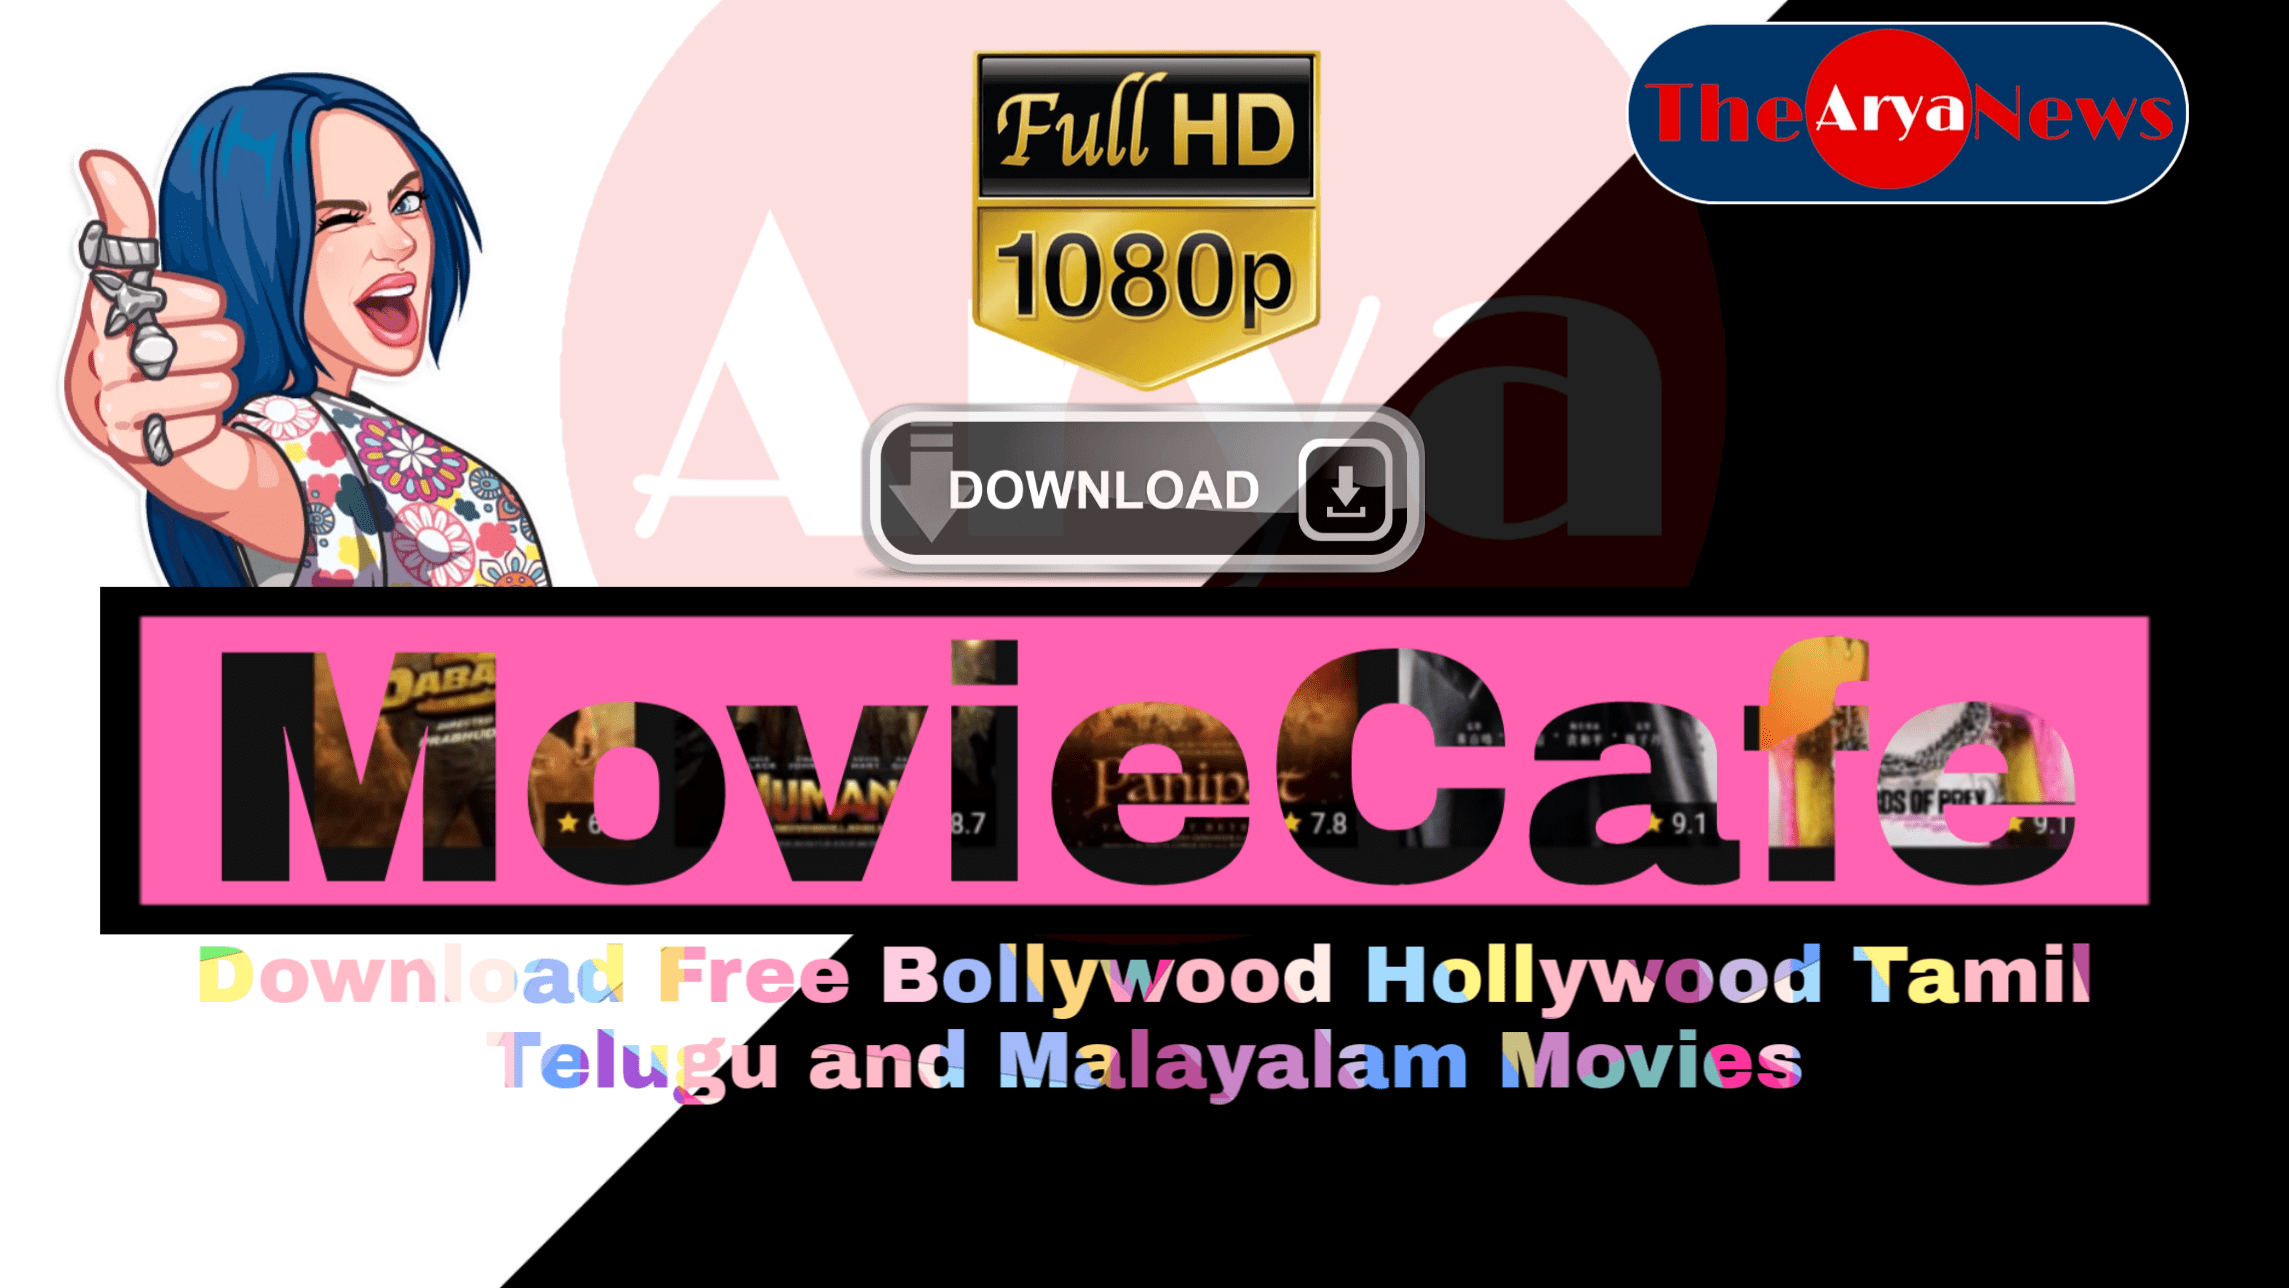 MovieCafe 2020 » Download Free Bollywood, Dubbed Movies Hollywood